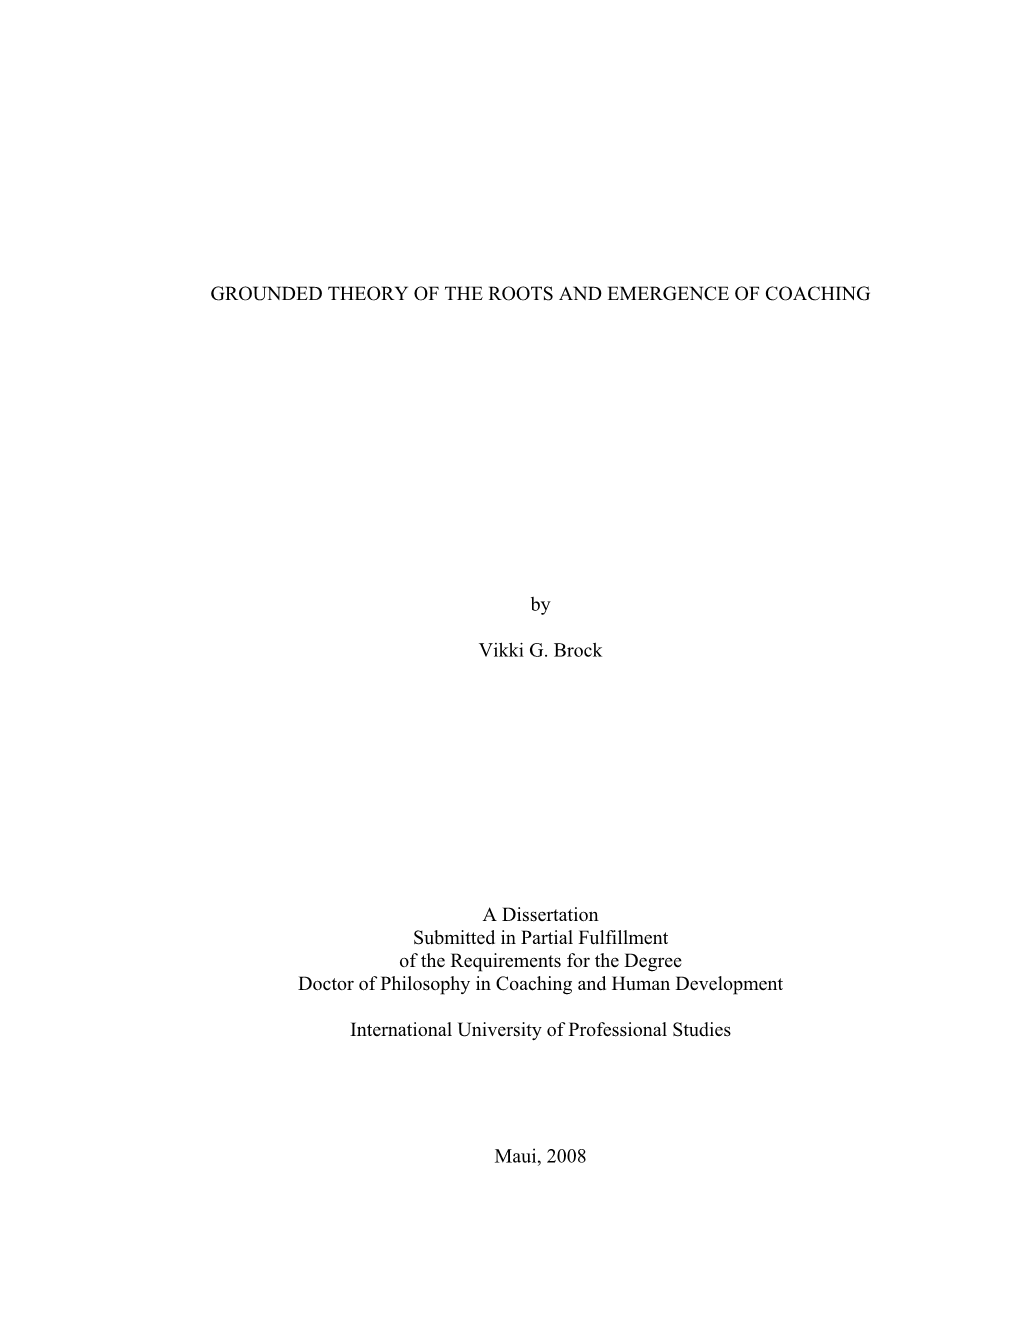 GROUNDED THEORY of the ROOTS and EMERGENCE of COACHING by Vikki G. Brock a Dissertation Submitted in Partial Fulfillment Of